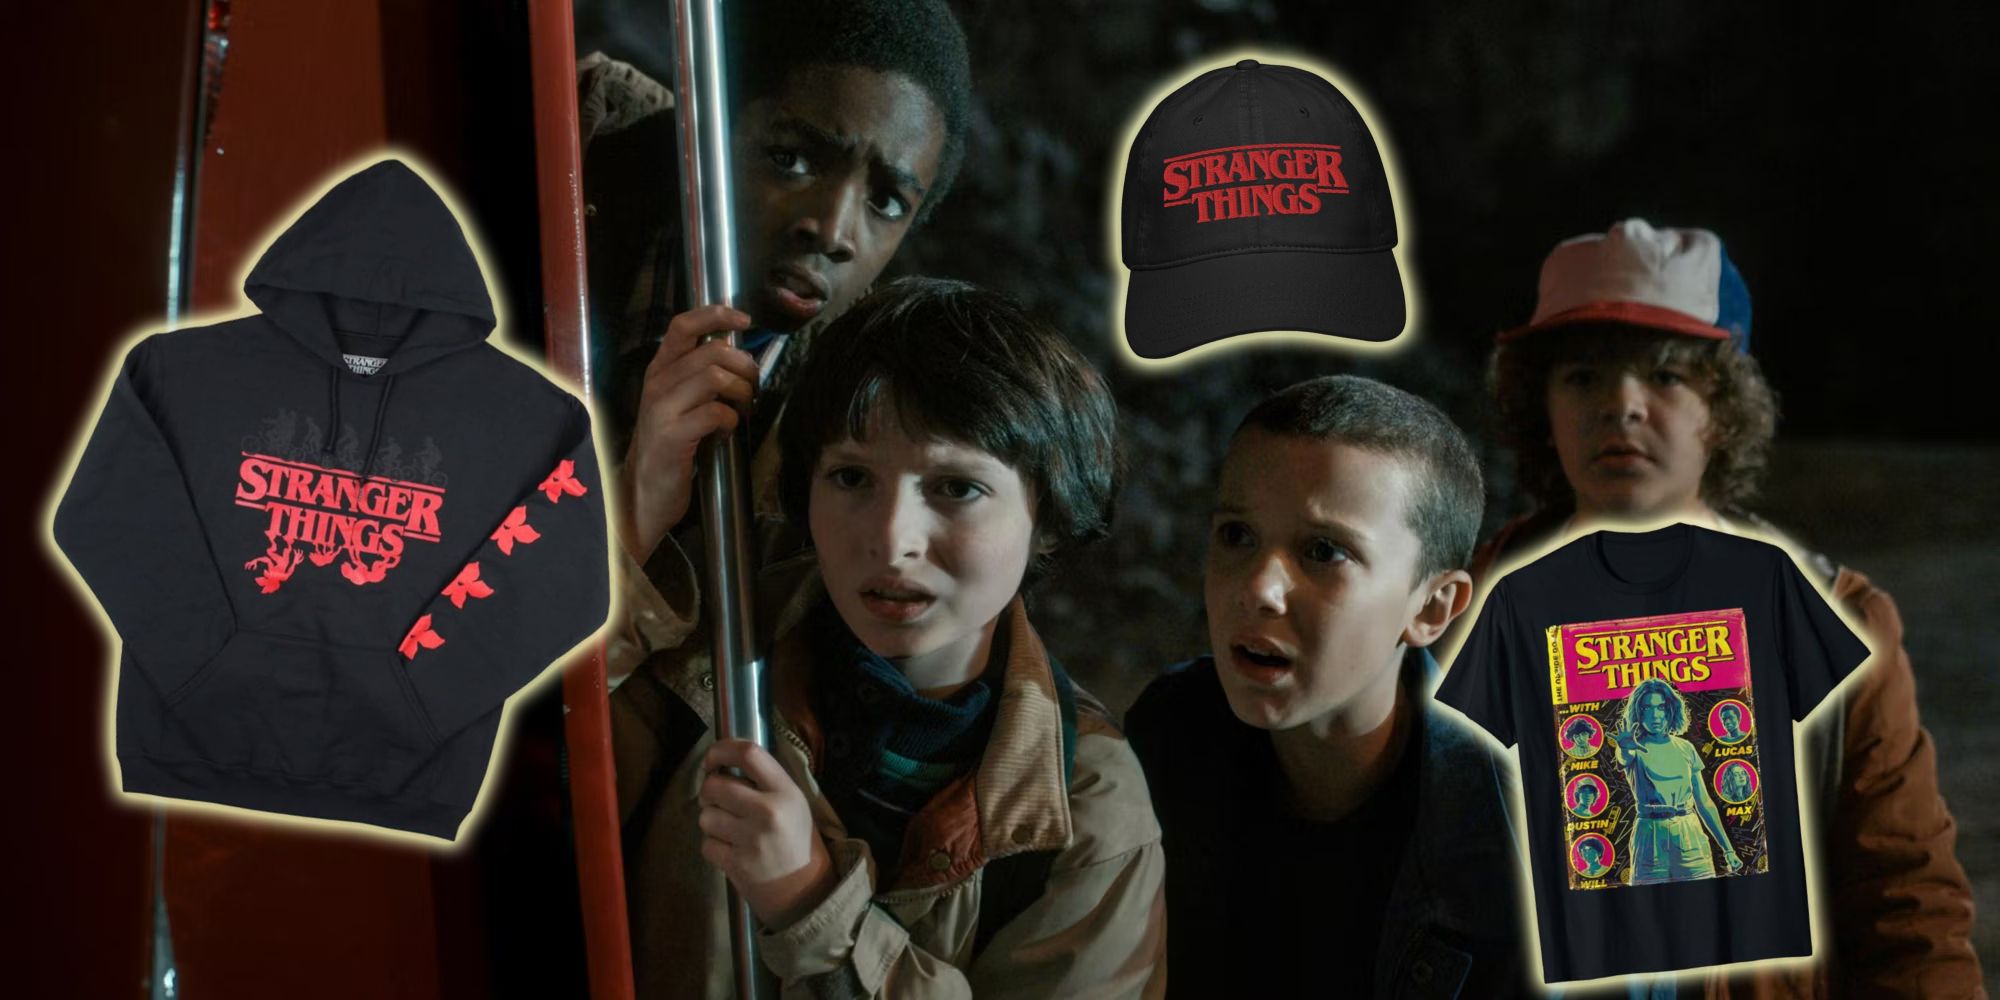 Best Stranger Things Clothes